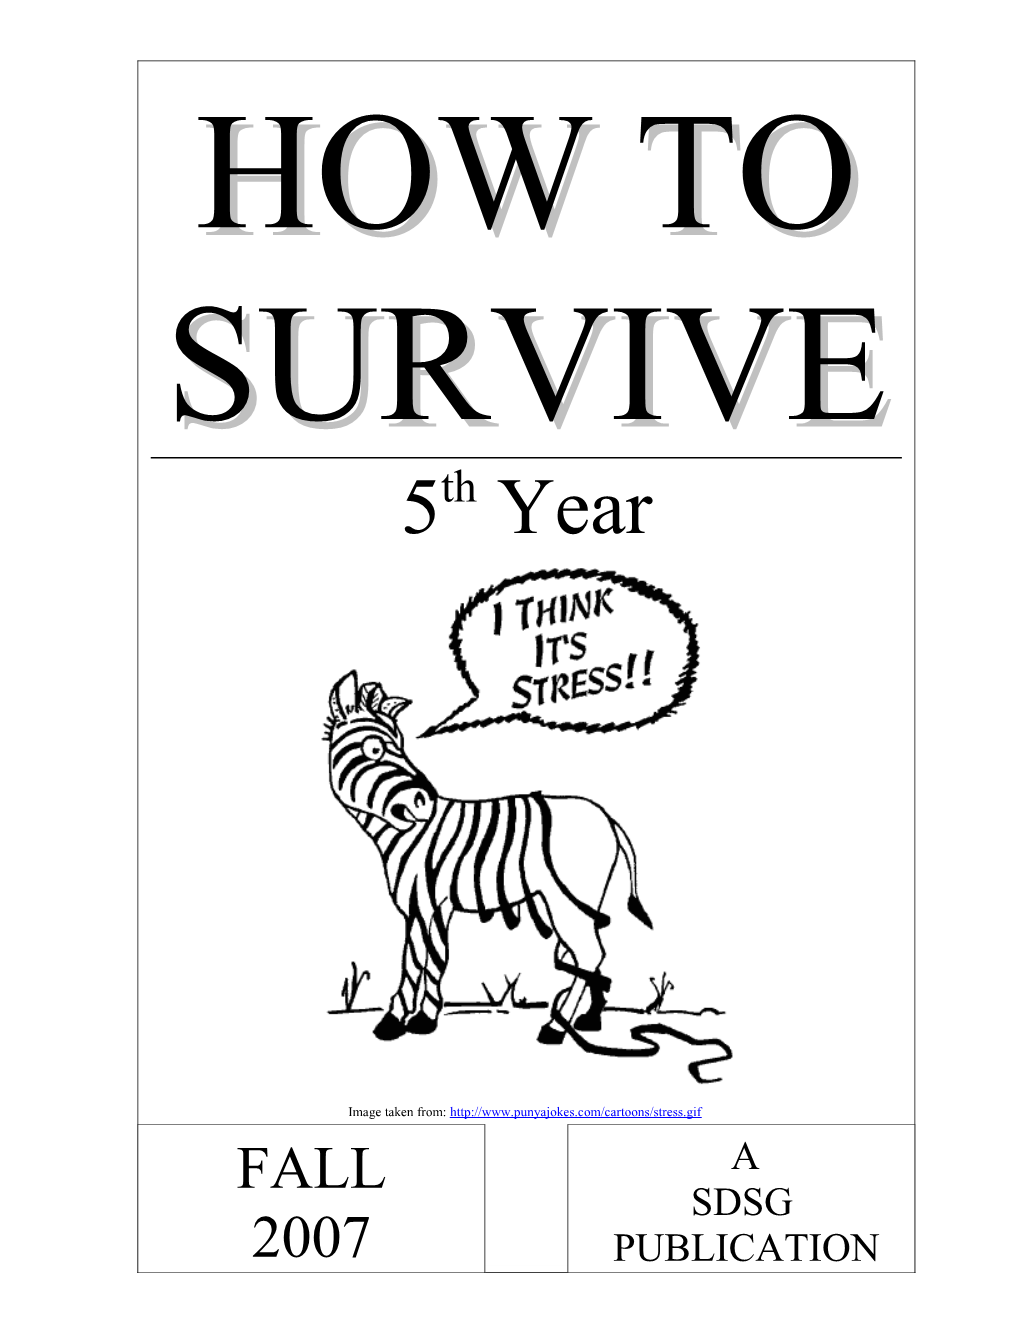 How to Survive Guide 5Th Year 1